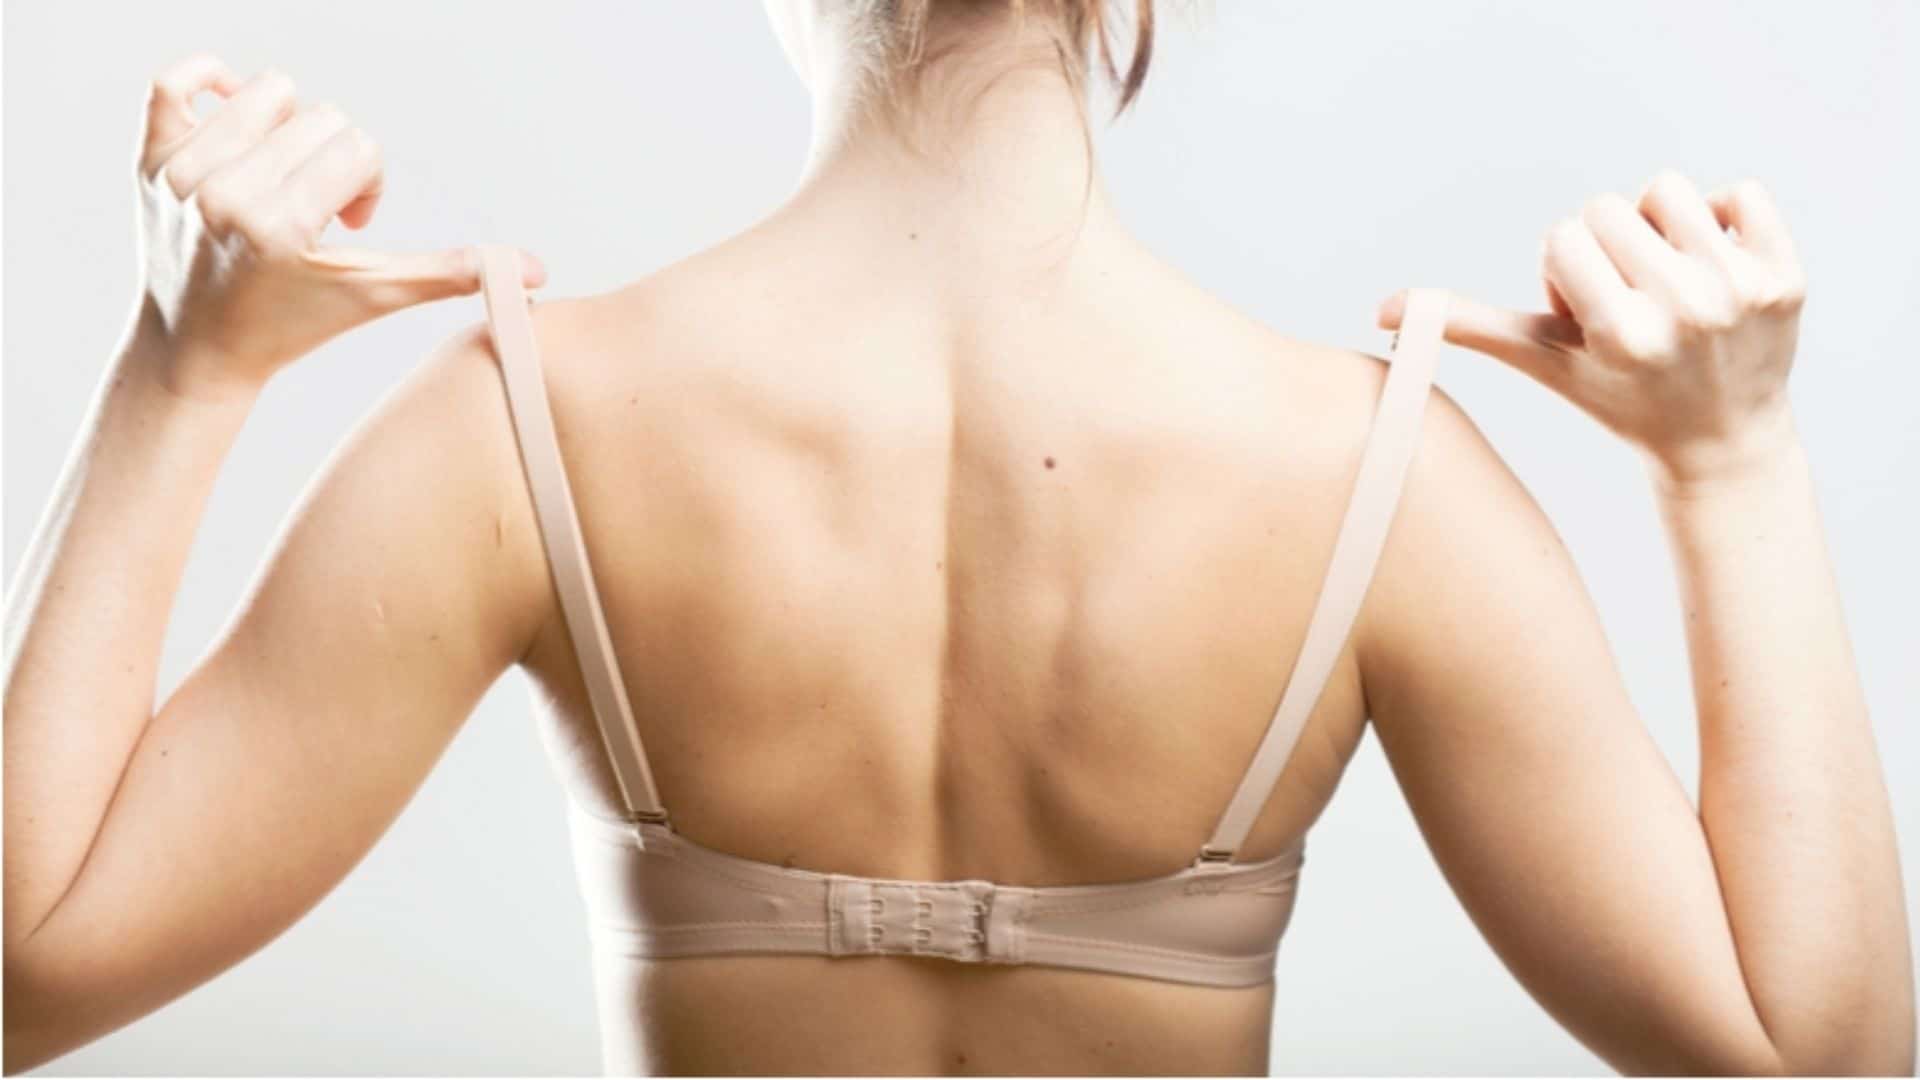 What's the MOST IMPORTANT quality a bra fitter should have? It goes be